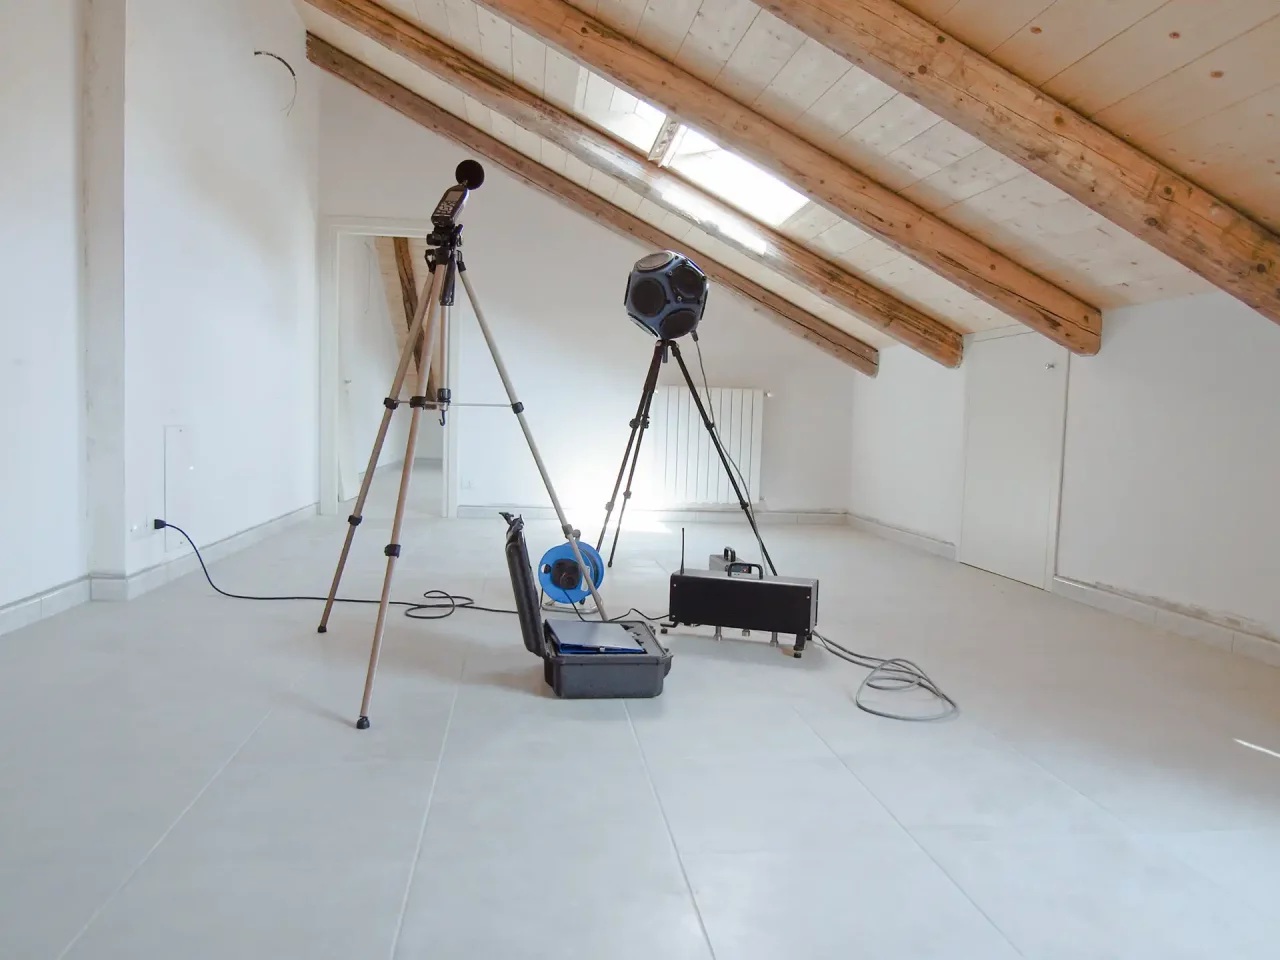 Measuring equipment and lighting in attic for examination by Normec Uppenkamp.